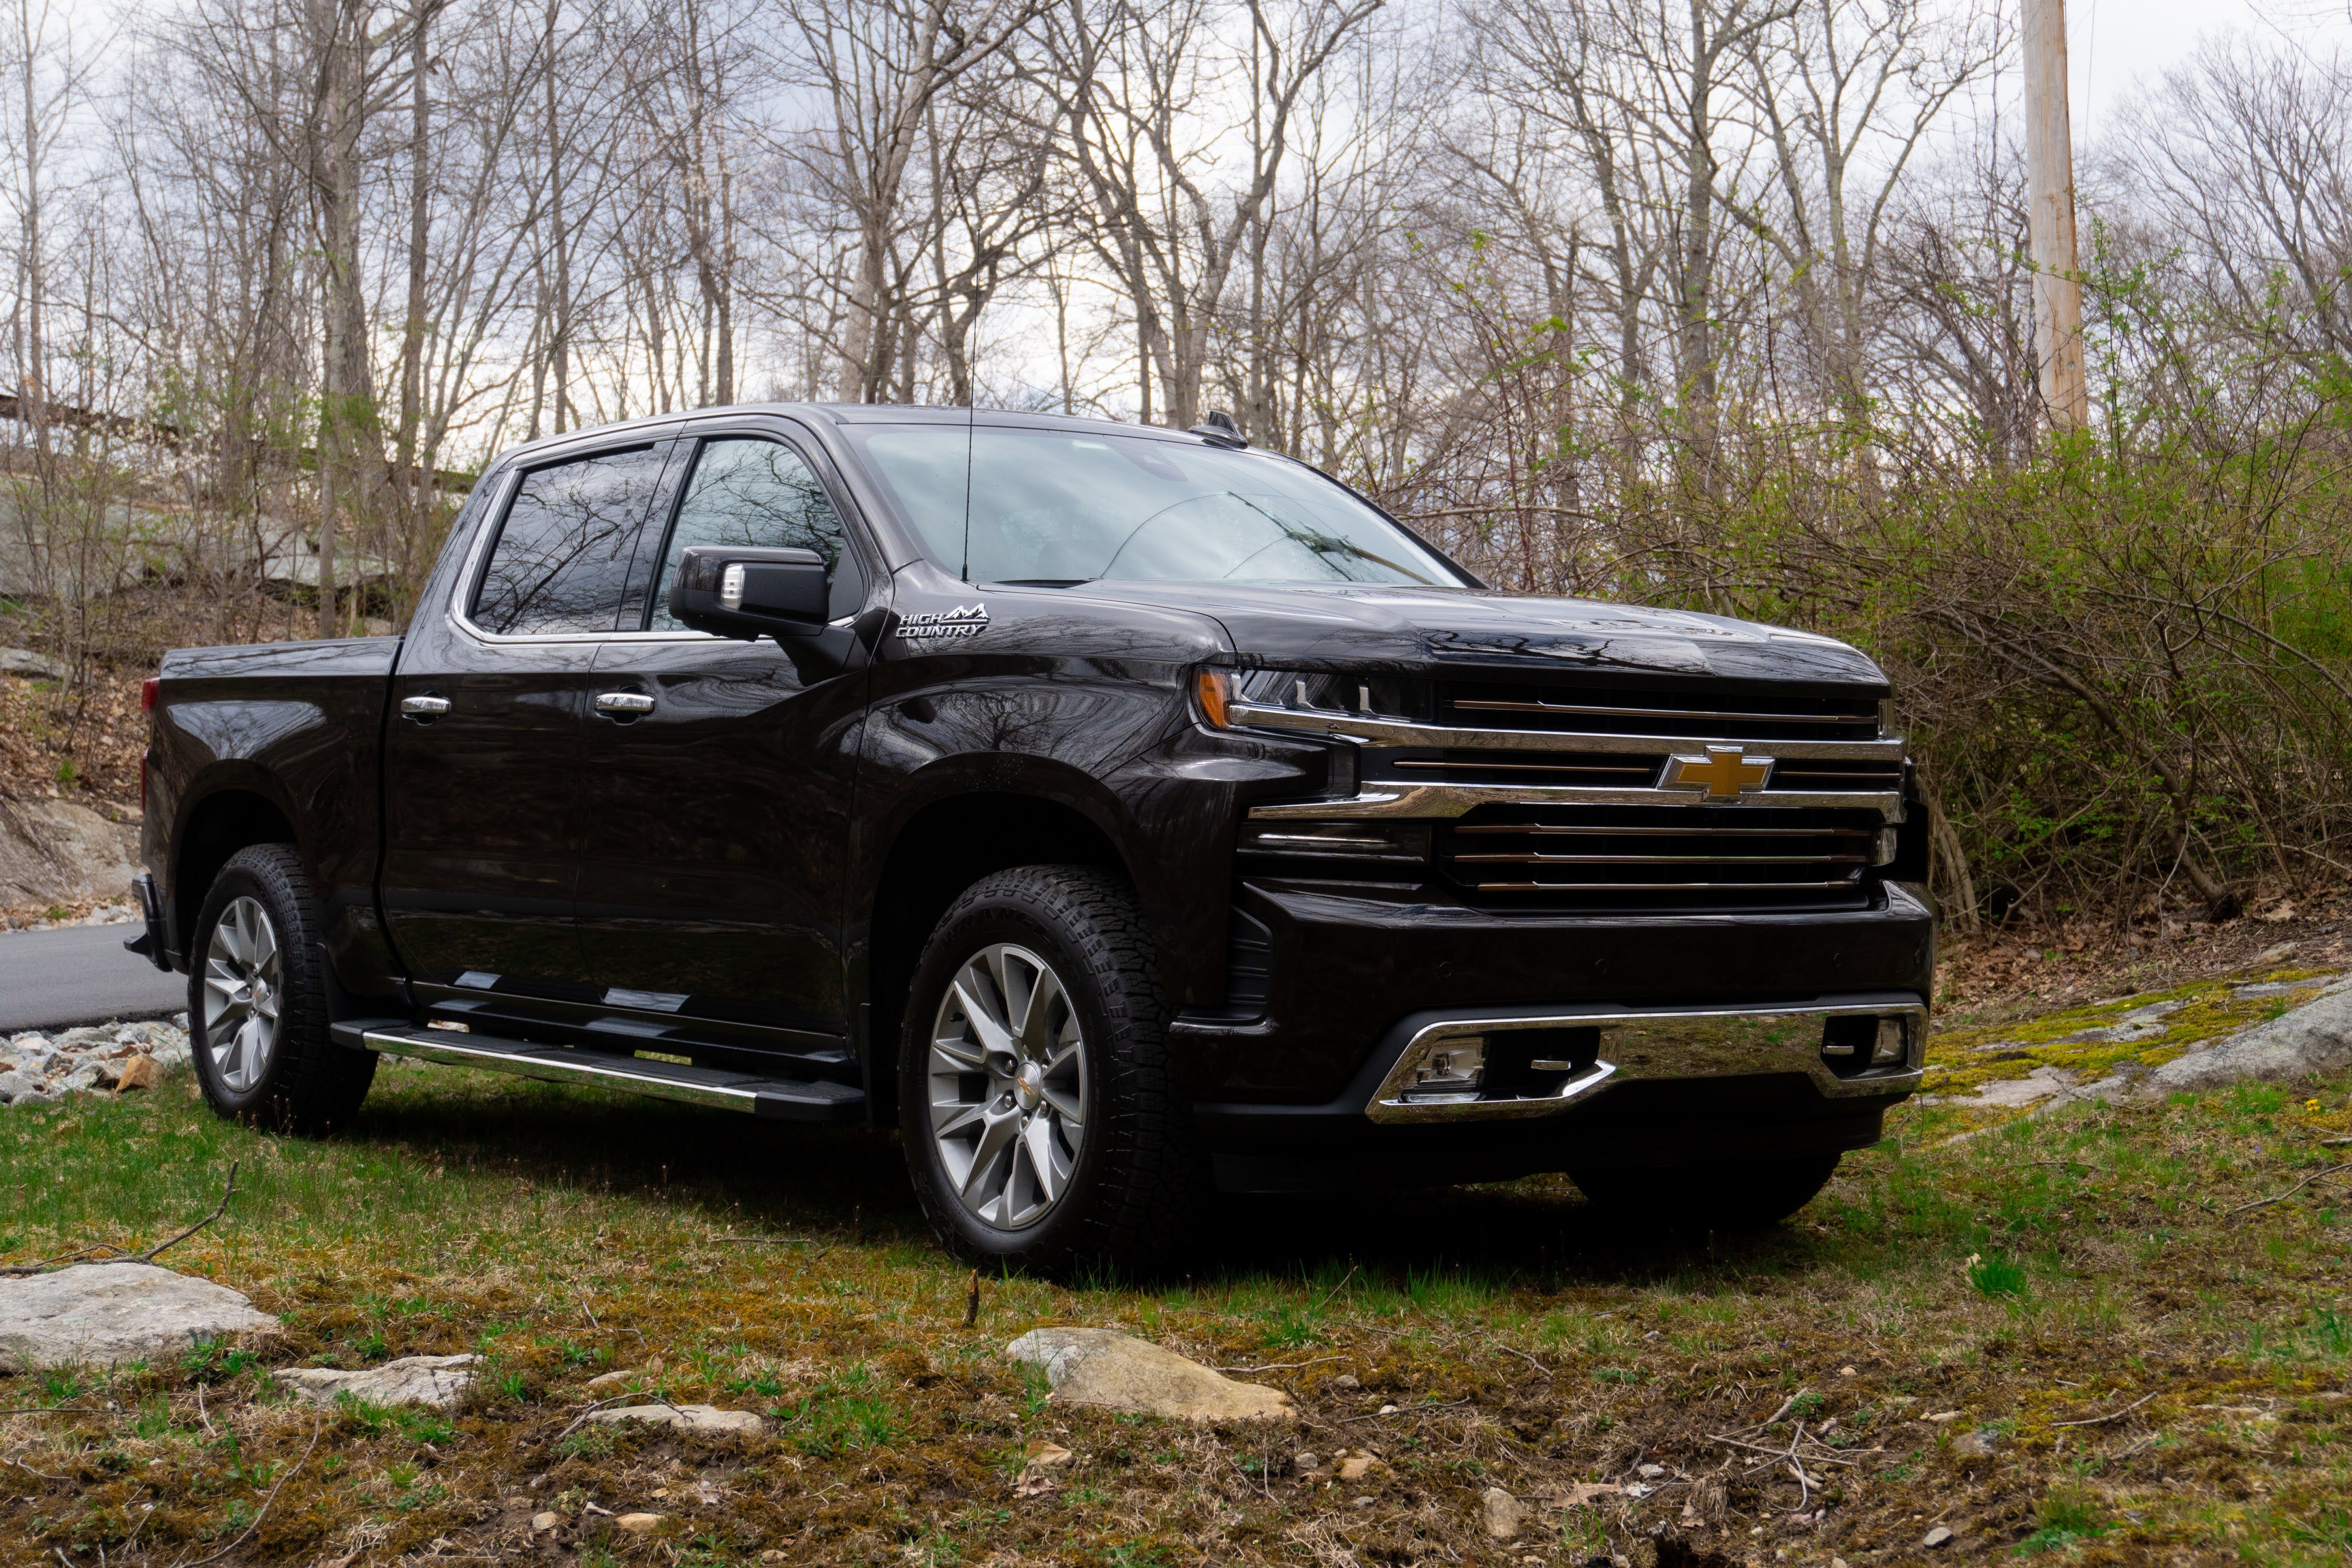 2020 Chevy Silverado High Country Is a Great Road Trip Truck